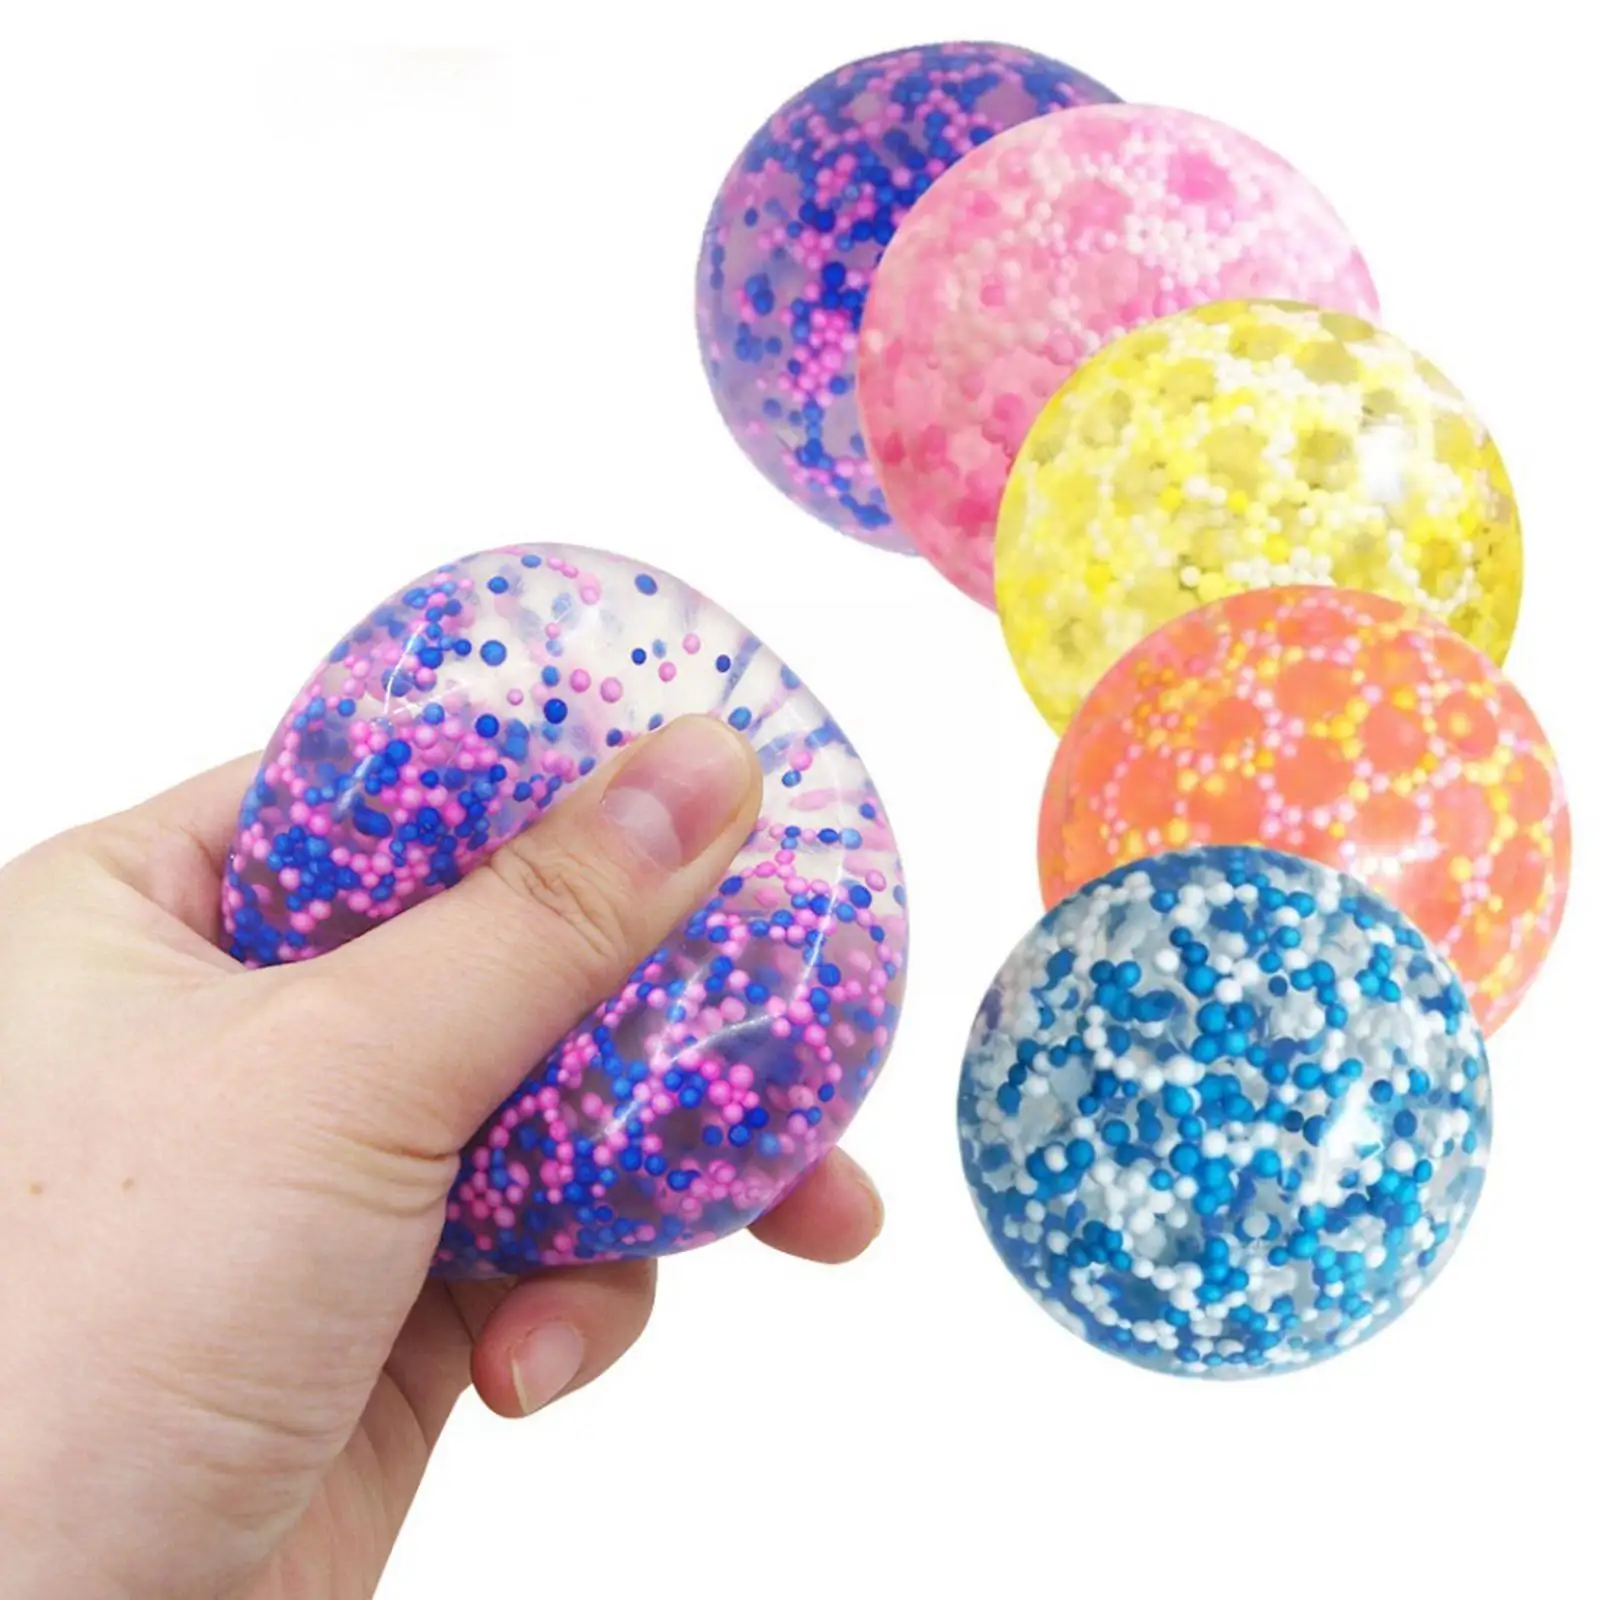 

Stress Relief Squeezing Balls For Kids And Adults Anti-stress Squishy Color Balls With Water Beads Alleviate Tension Toy T0l4